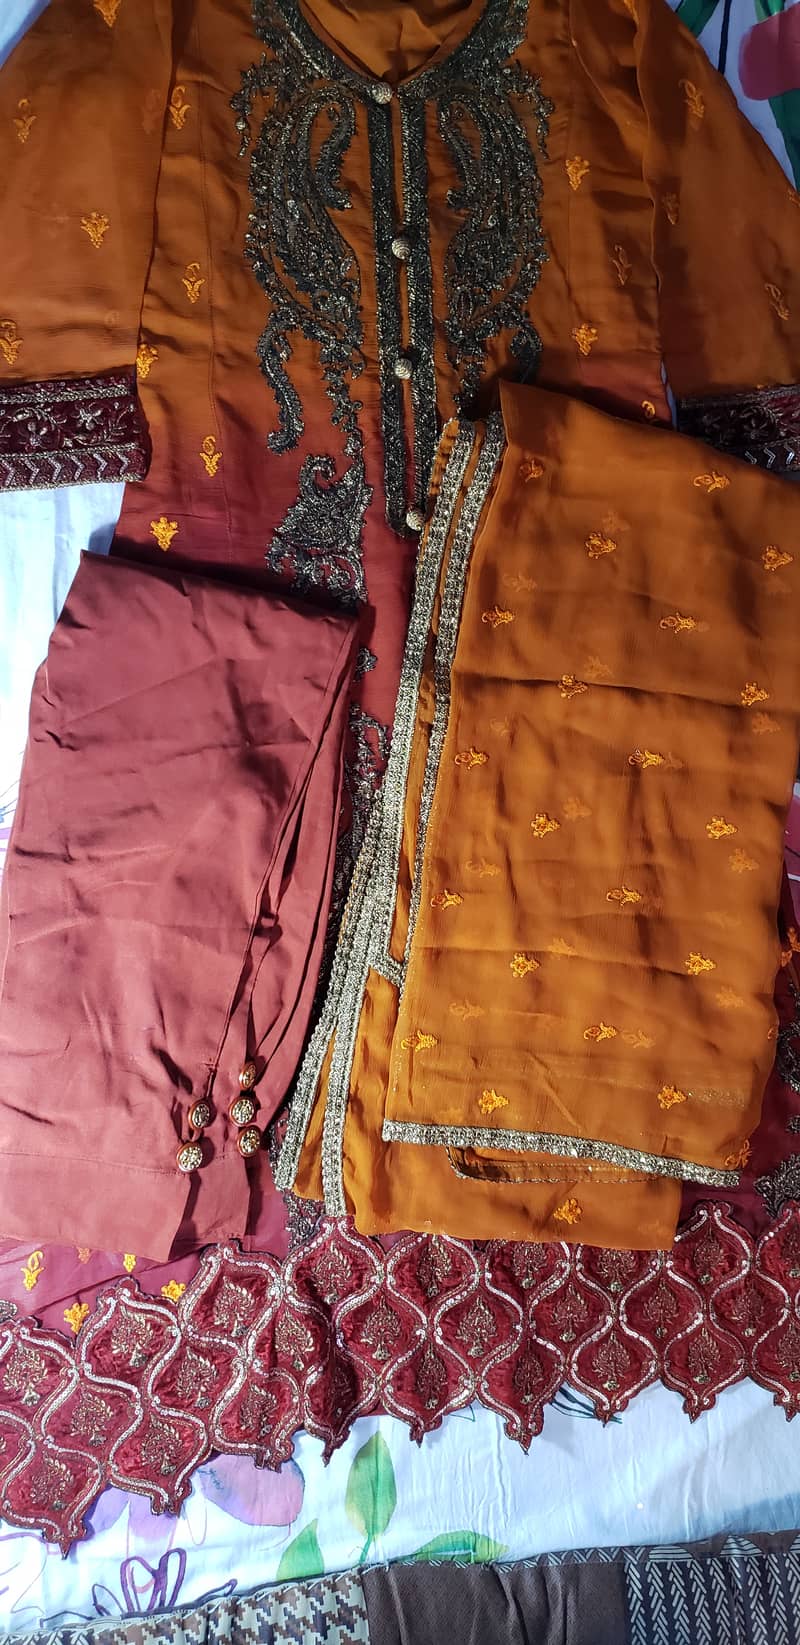 Loot Sale (3 Piece Rust color wedding dress (size small)) 2